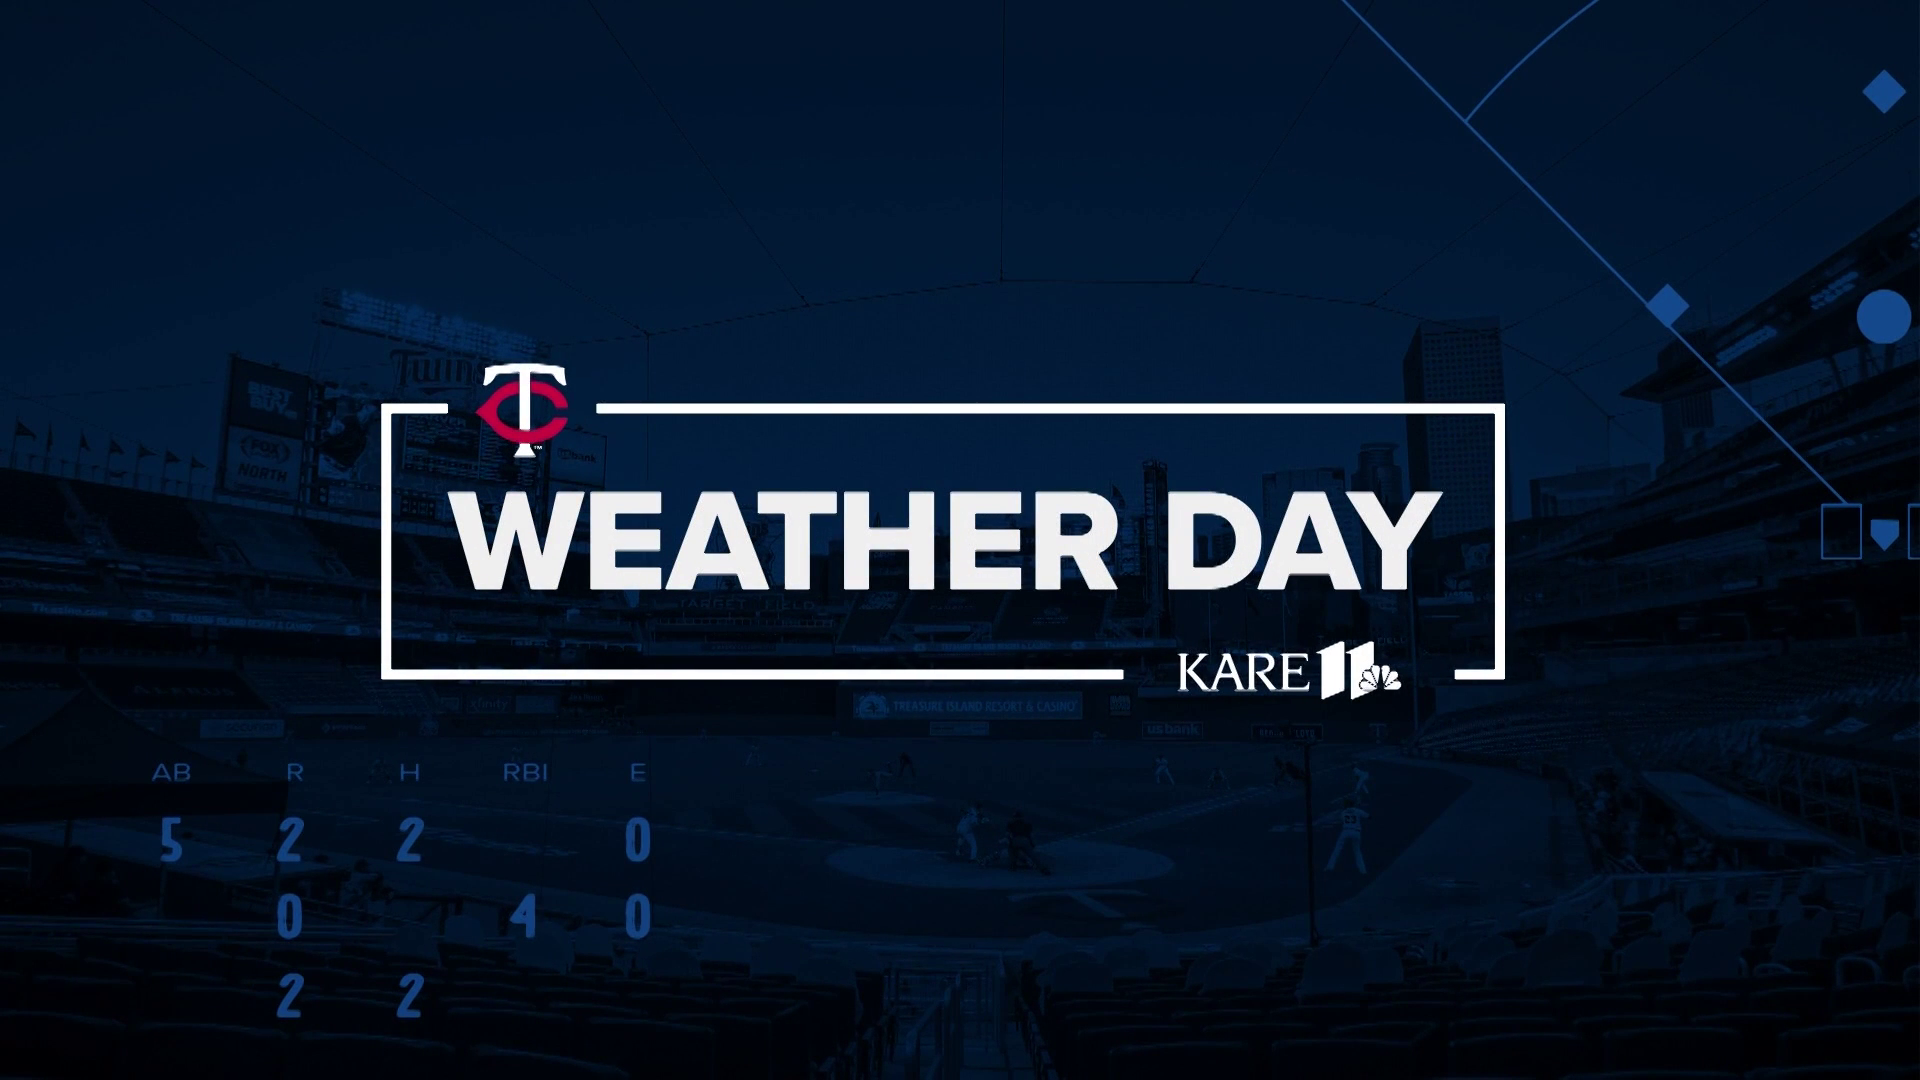 KARE 11 meteorologists and the Minnesota Twins team up to celebrate weather, science and baseball!